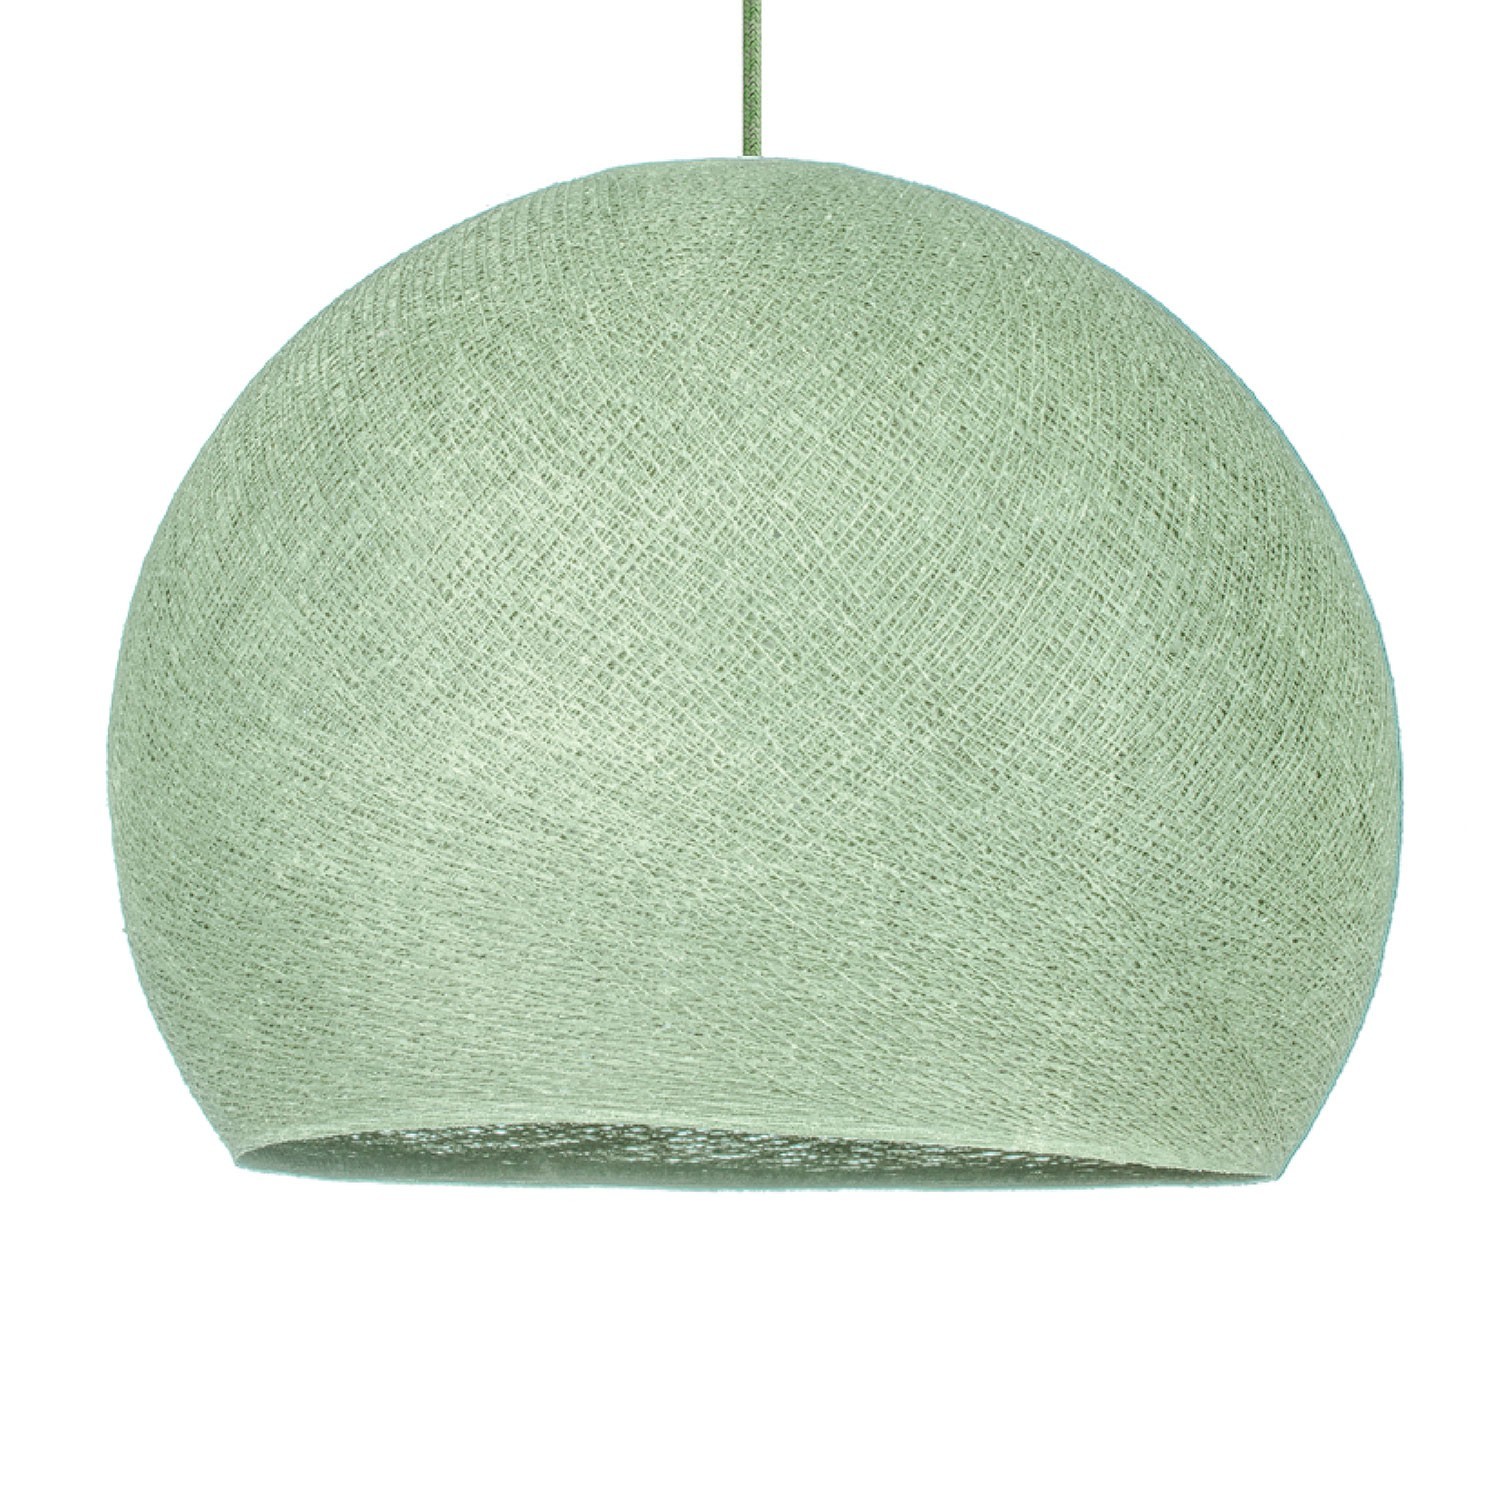 Suspension Lamp with Dome Lampshade